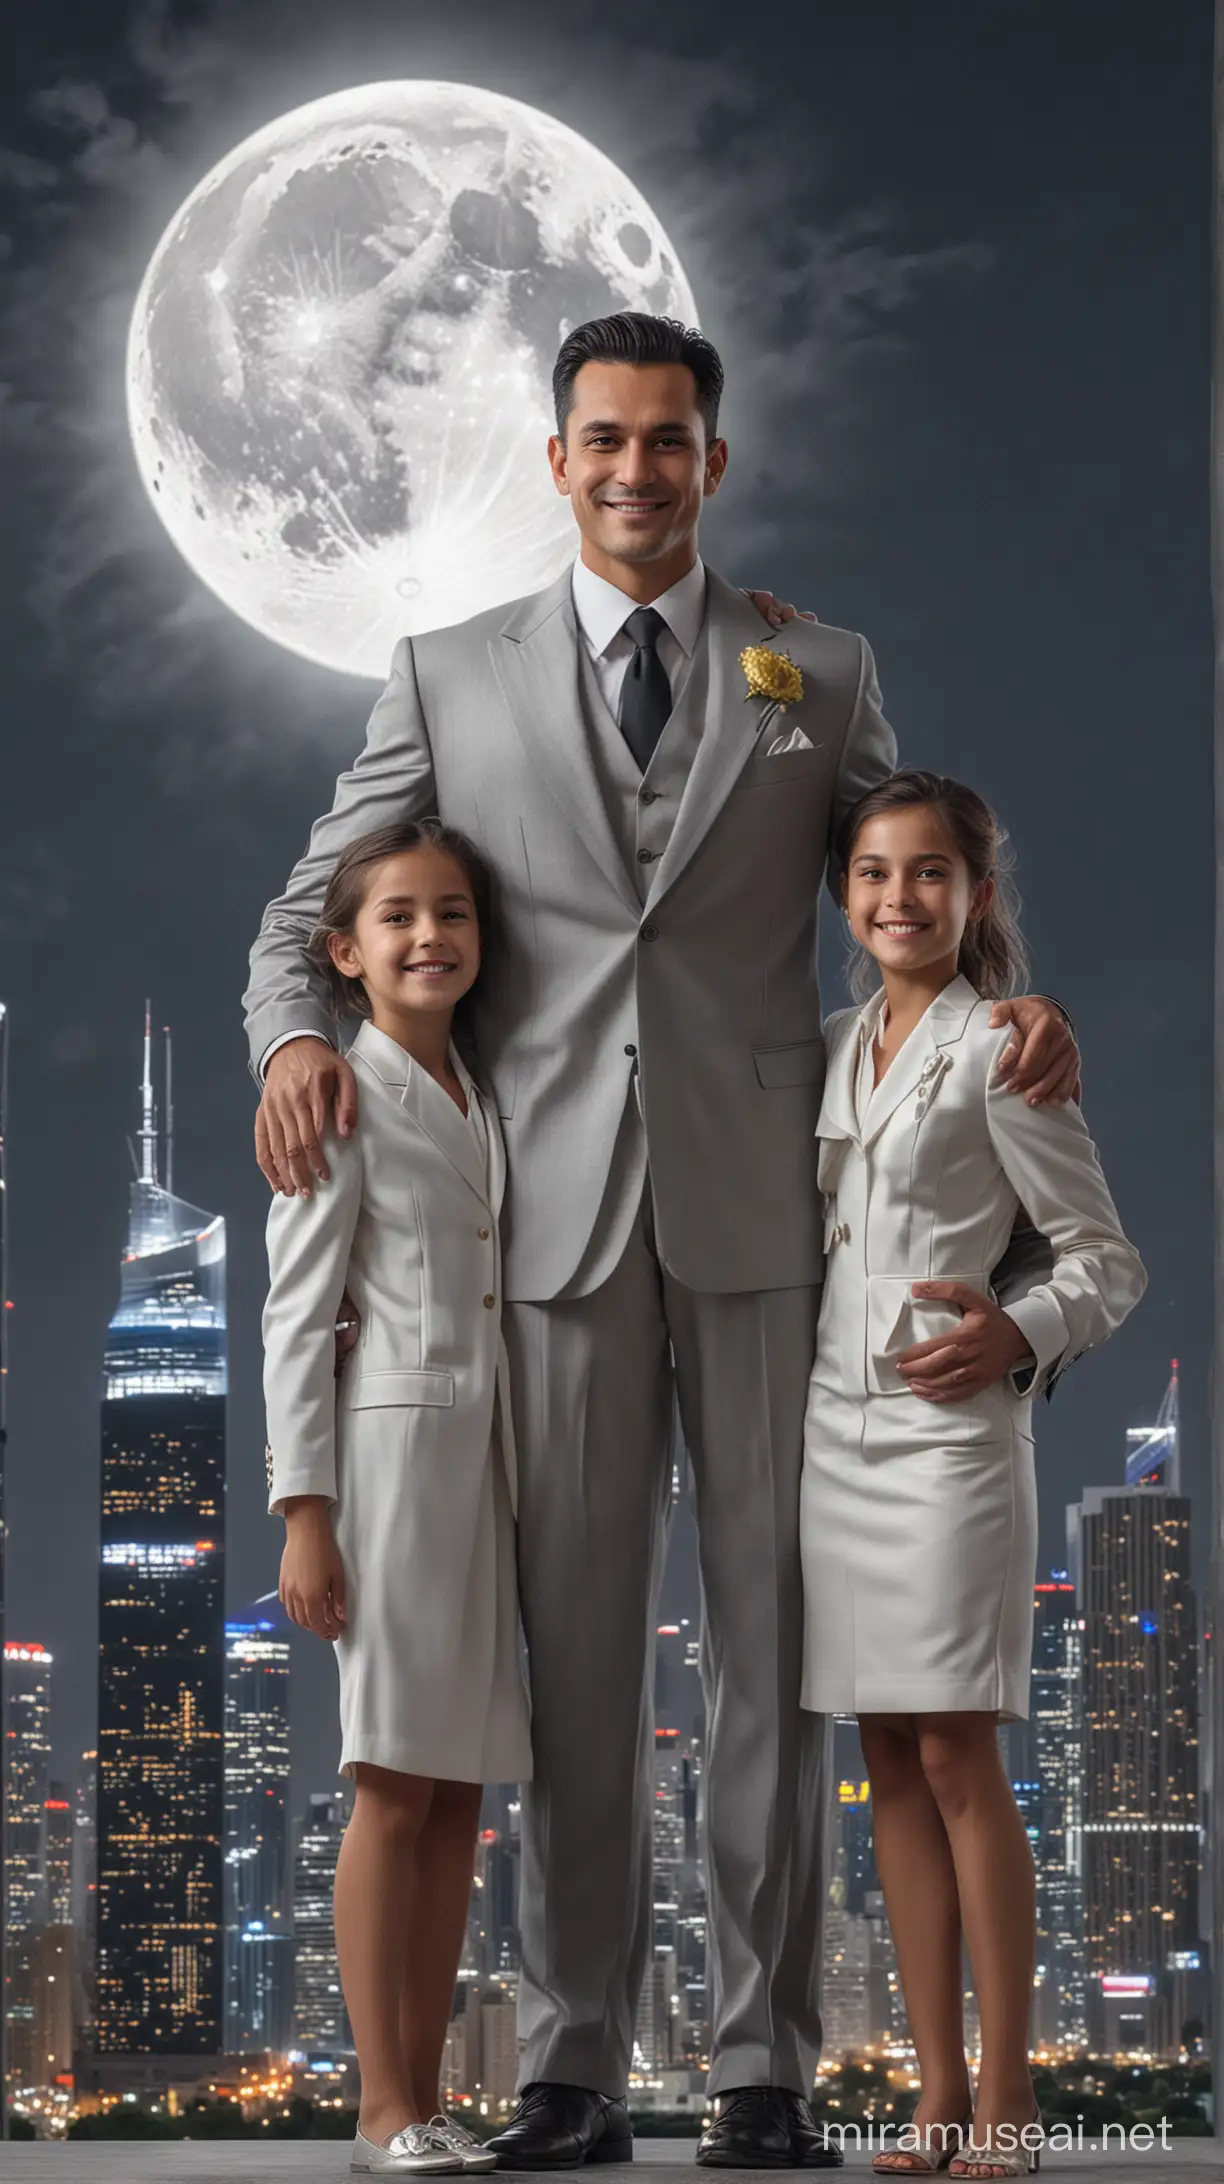 ultra realistic, against the background of the city skyscrapers and a large bright full moon, standing at full height, 40-year-old Miles Moralez, mature and physically strong, in a shining suit, smiling and friendly, surrounded by his daughter, 18 years old, son, 12 years old, and son, 5 years old